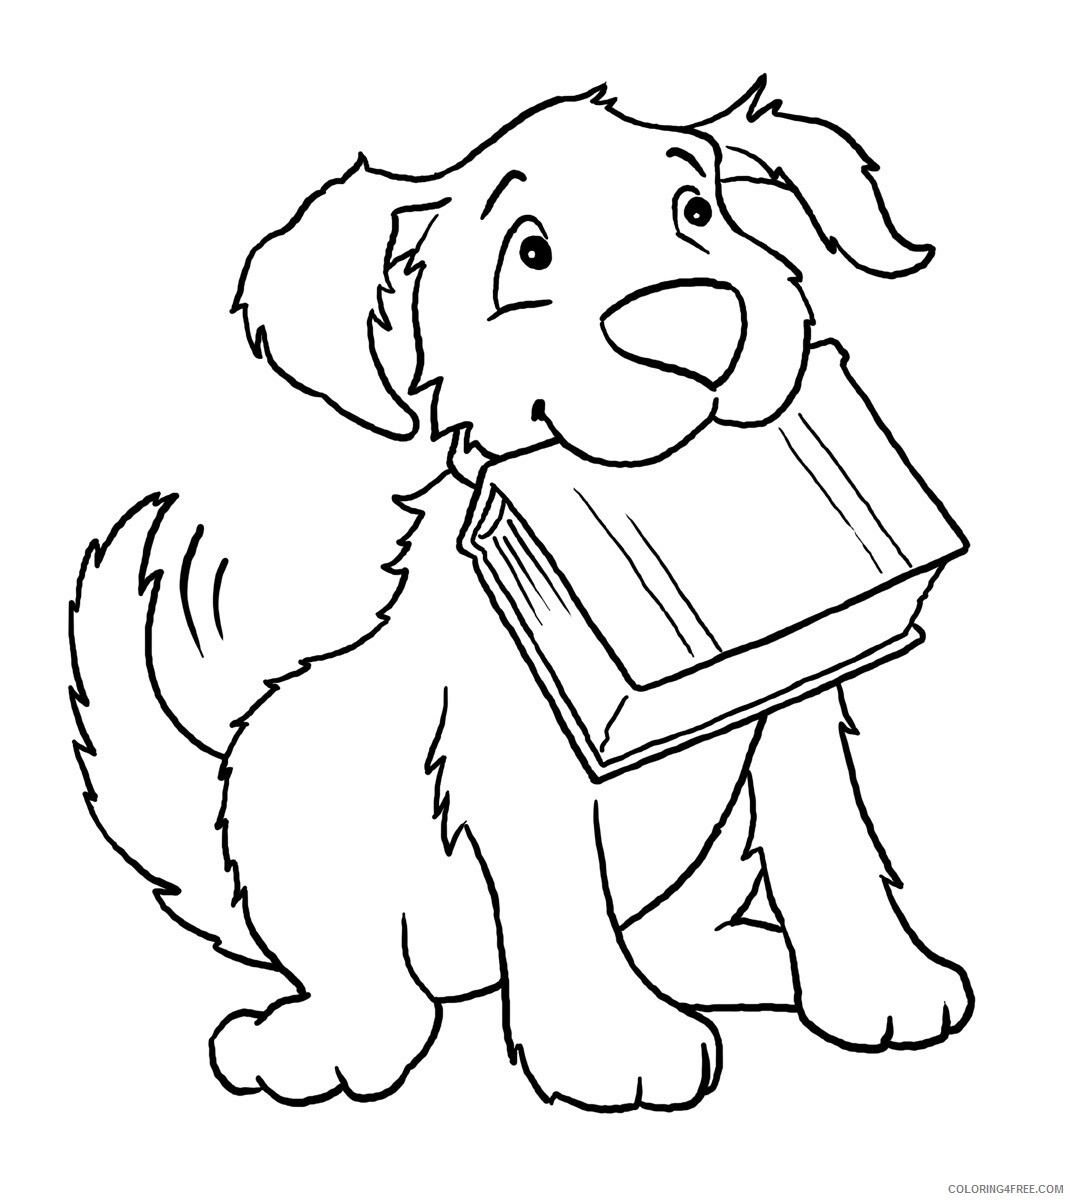 Dogs Coloring Pages Animal Printable Sheets Dogs 2021 1534 Coloring4free